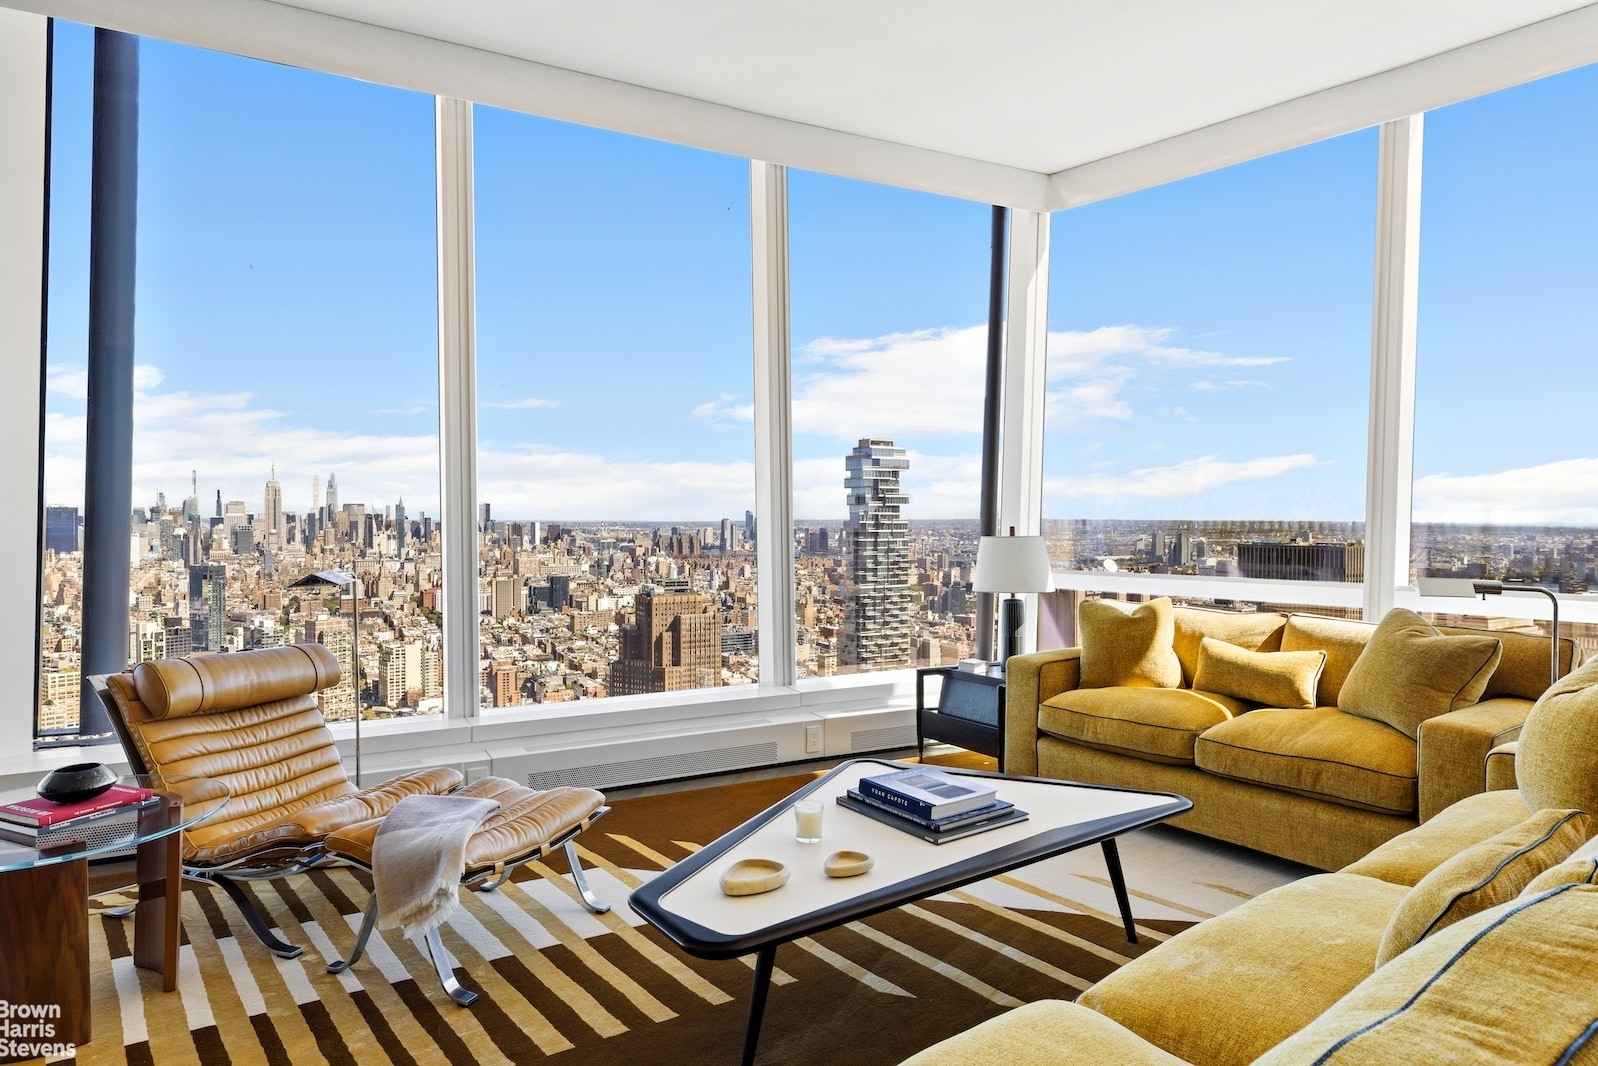 Property for Sale at TriBeCa, New York, NY 10007